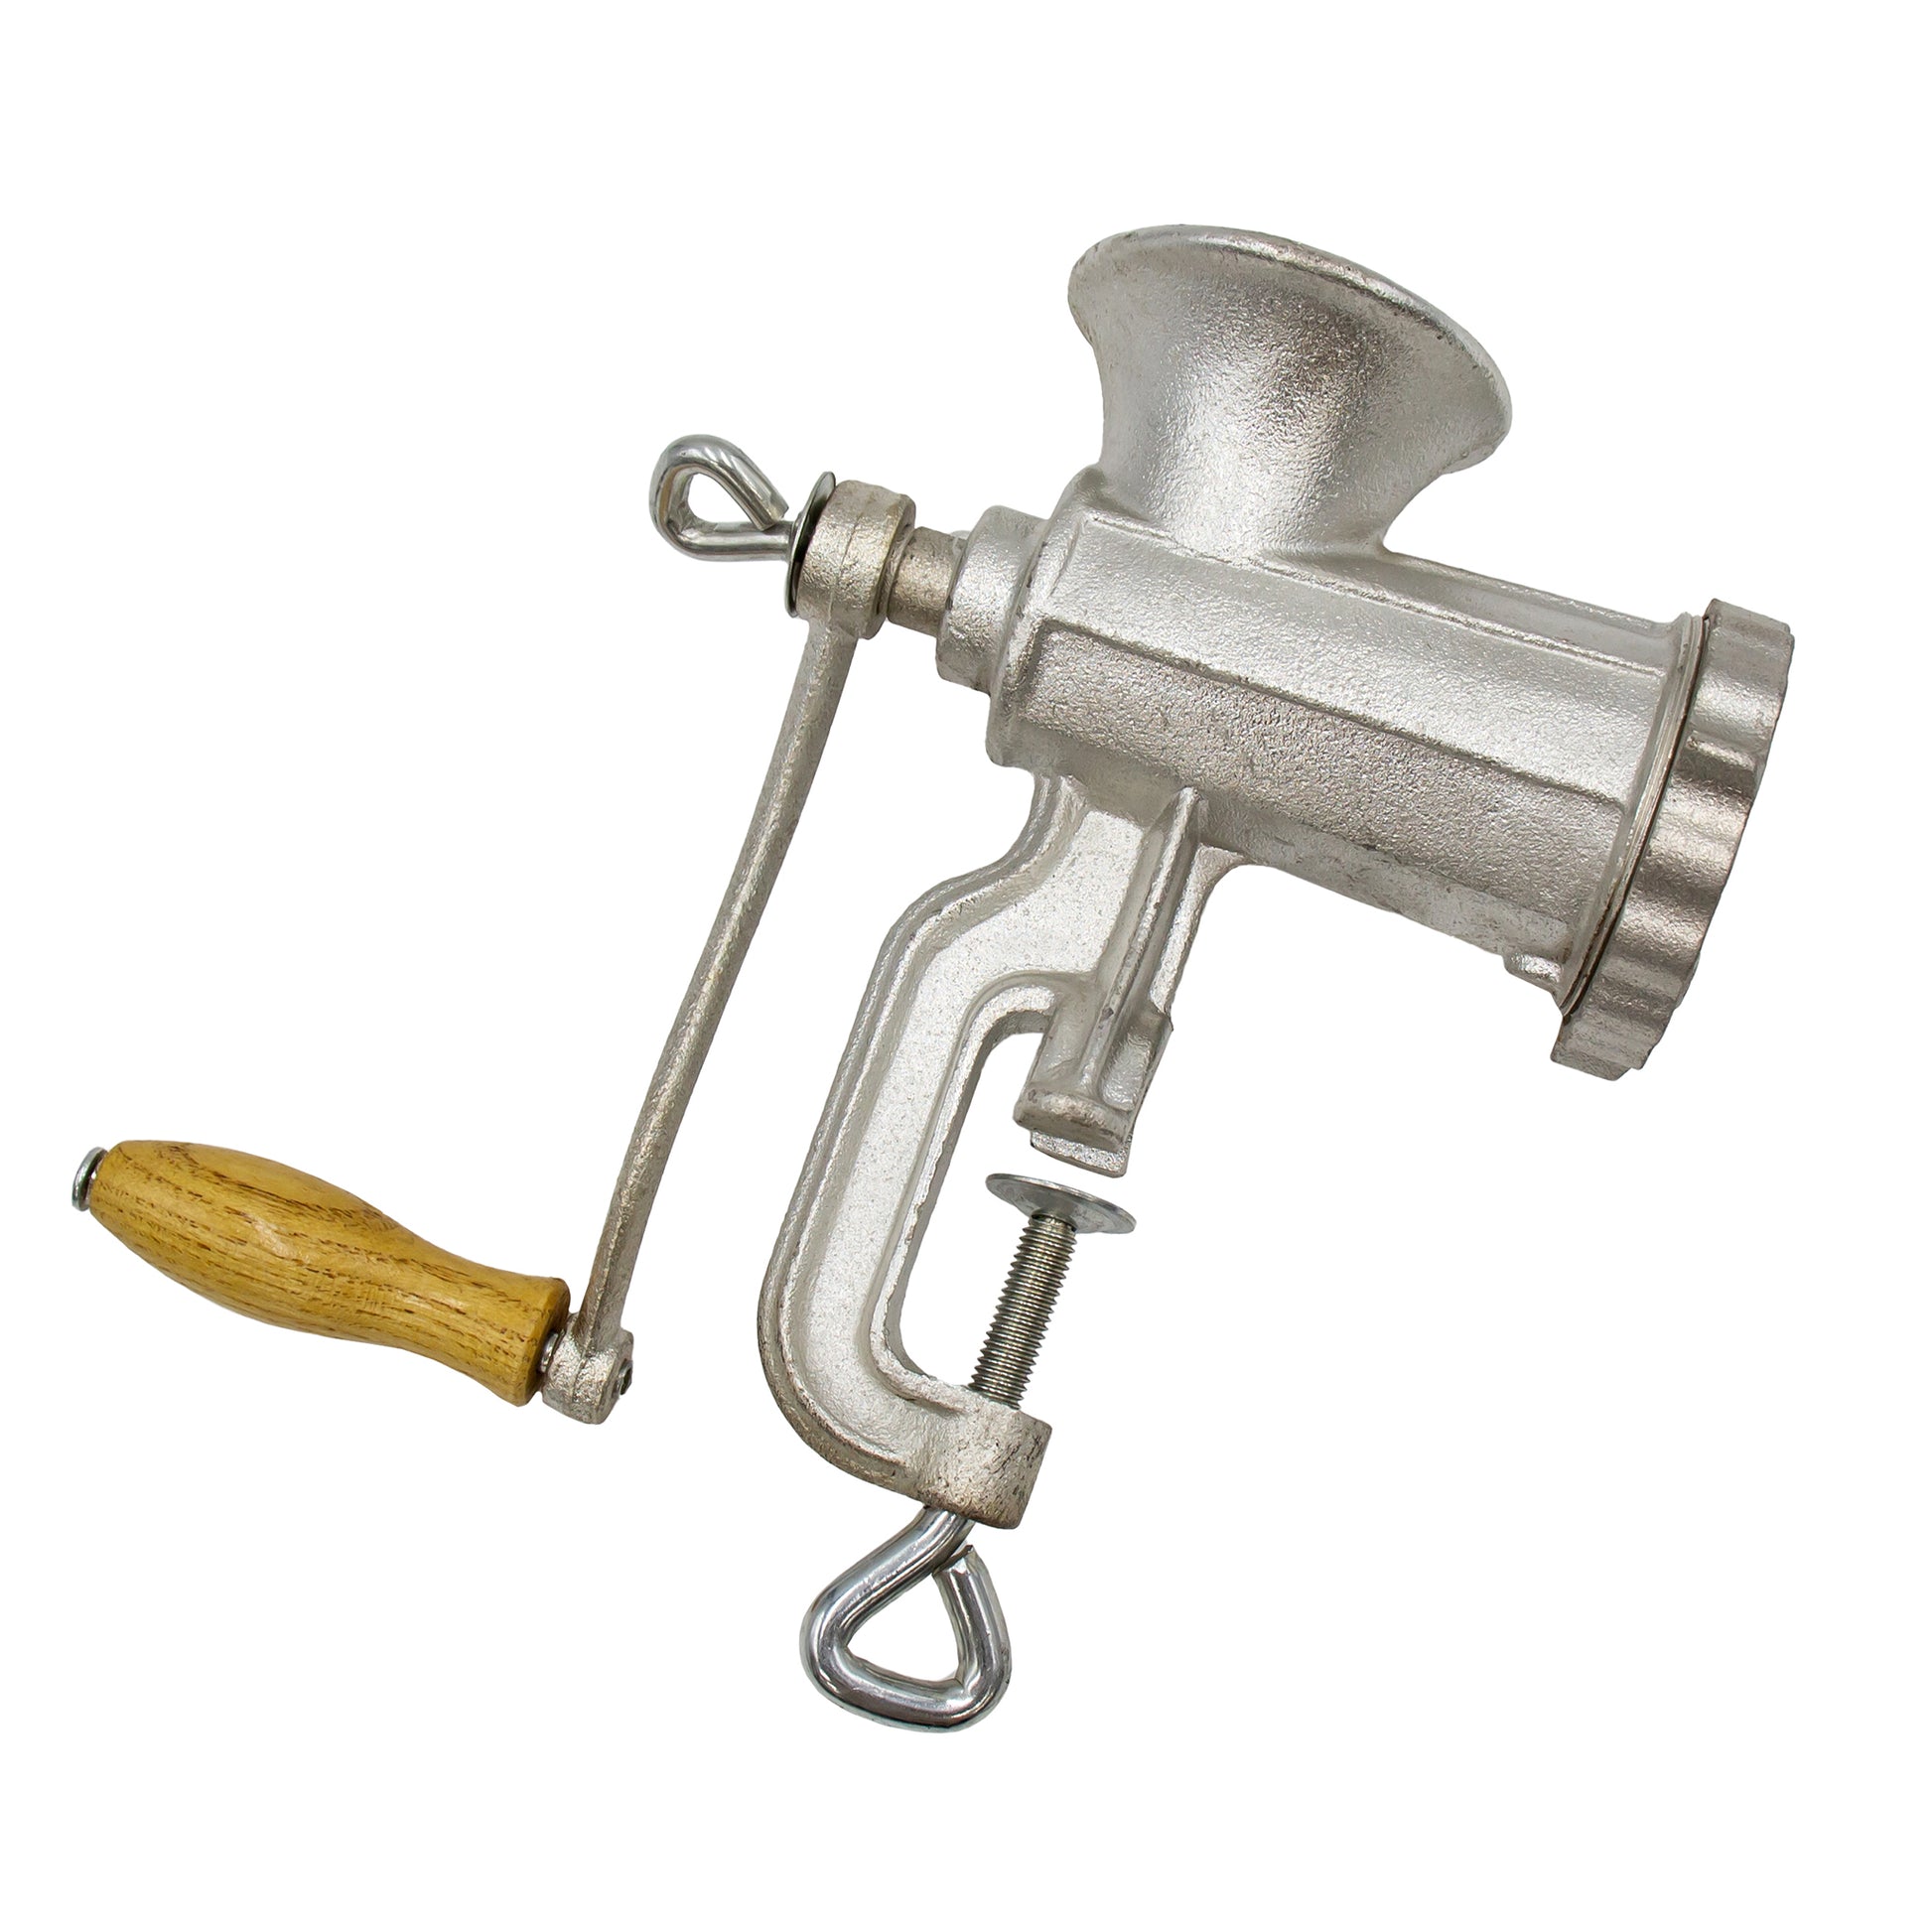 Number 10 manual mincer for making minced meat. 